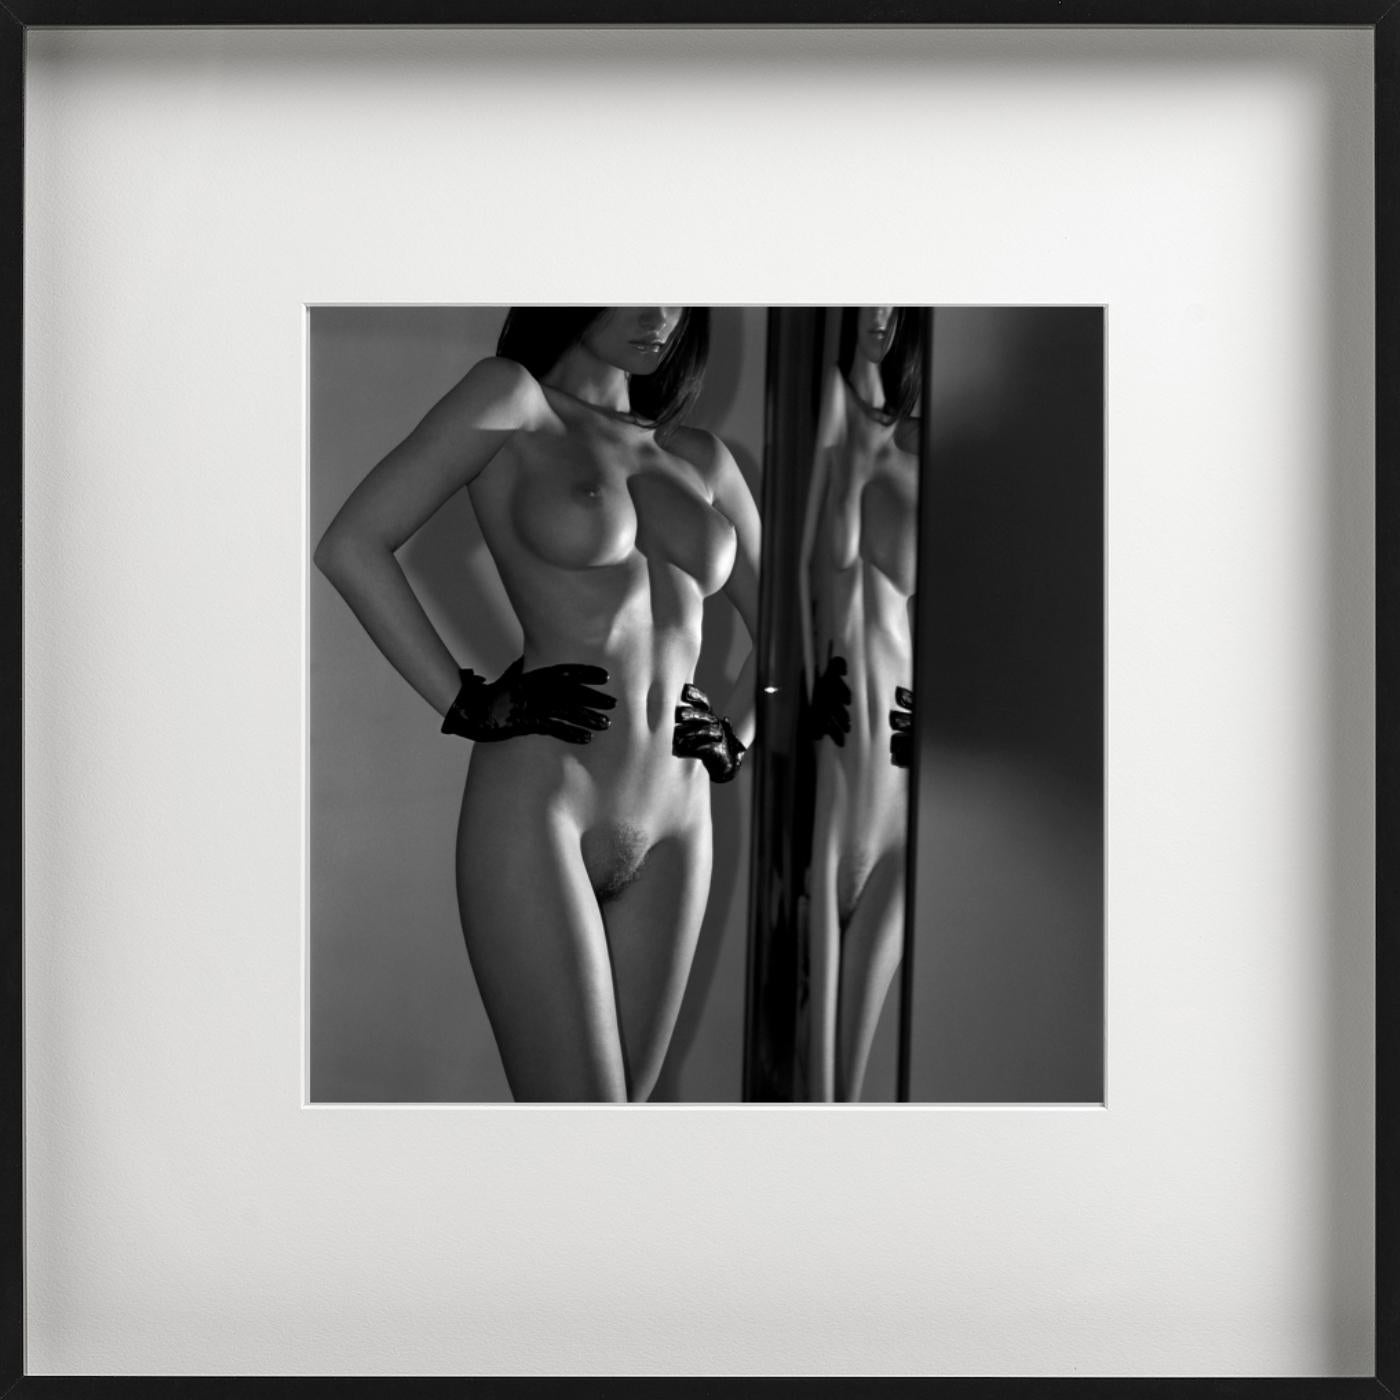 'Always moving upward' - nude with mirror, fine art photography, 2006 - Photograph by Guido Argentini